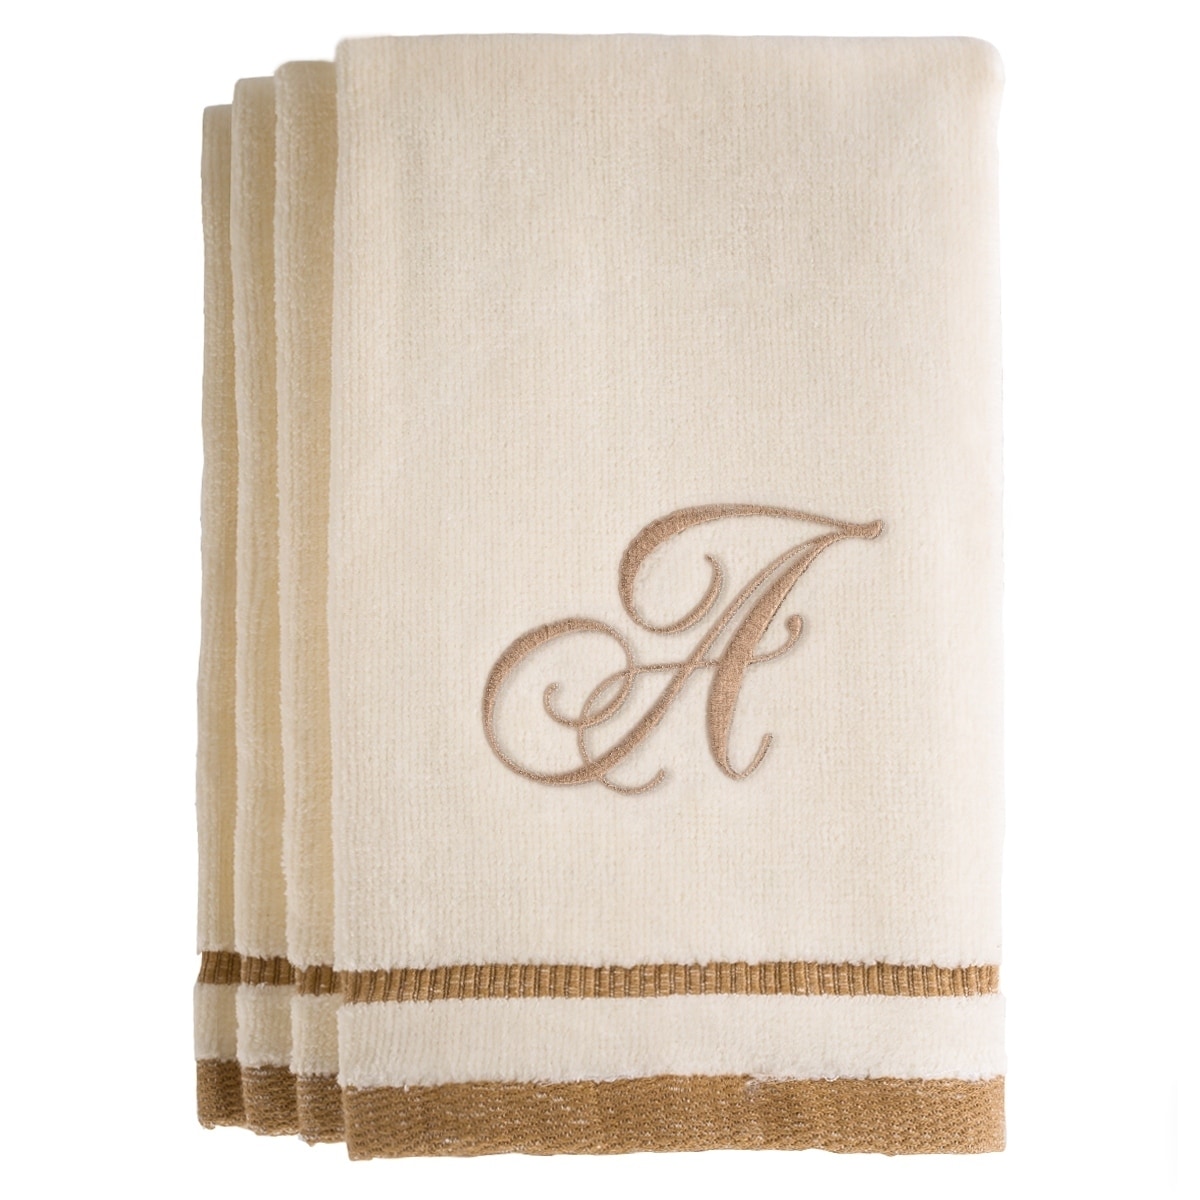 https://ak1.ostkcdn.com/images/products/25685288/Monogrammed-Ivory-Fingertip-Towels-Set-of-4-d705f868-f957-496a-b751-a42b59f23711.jpg